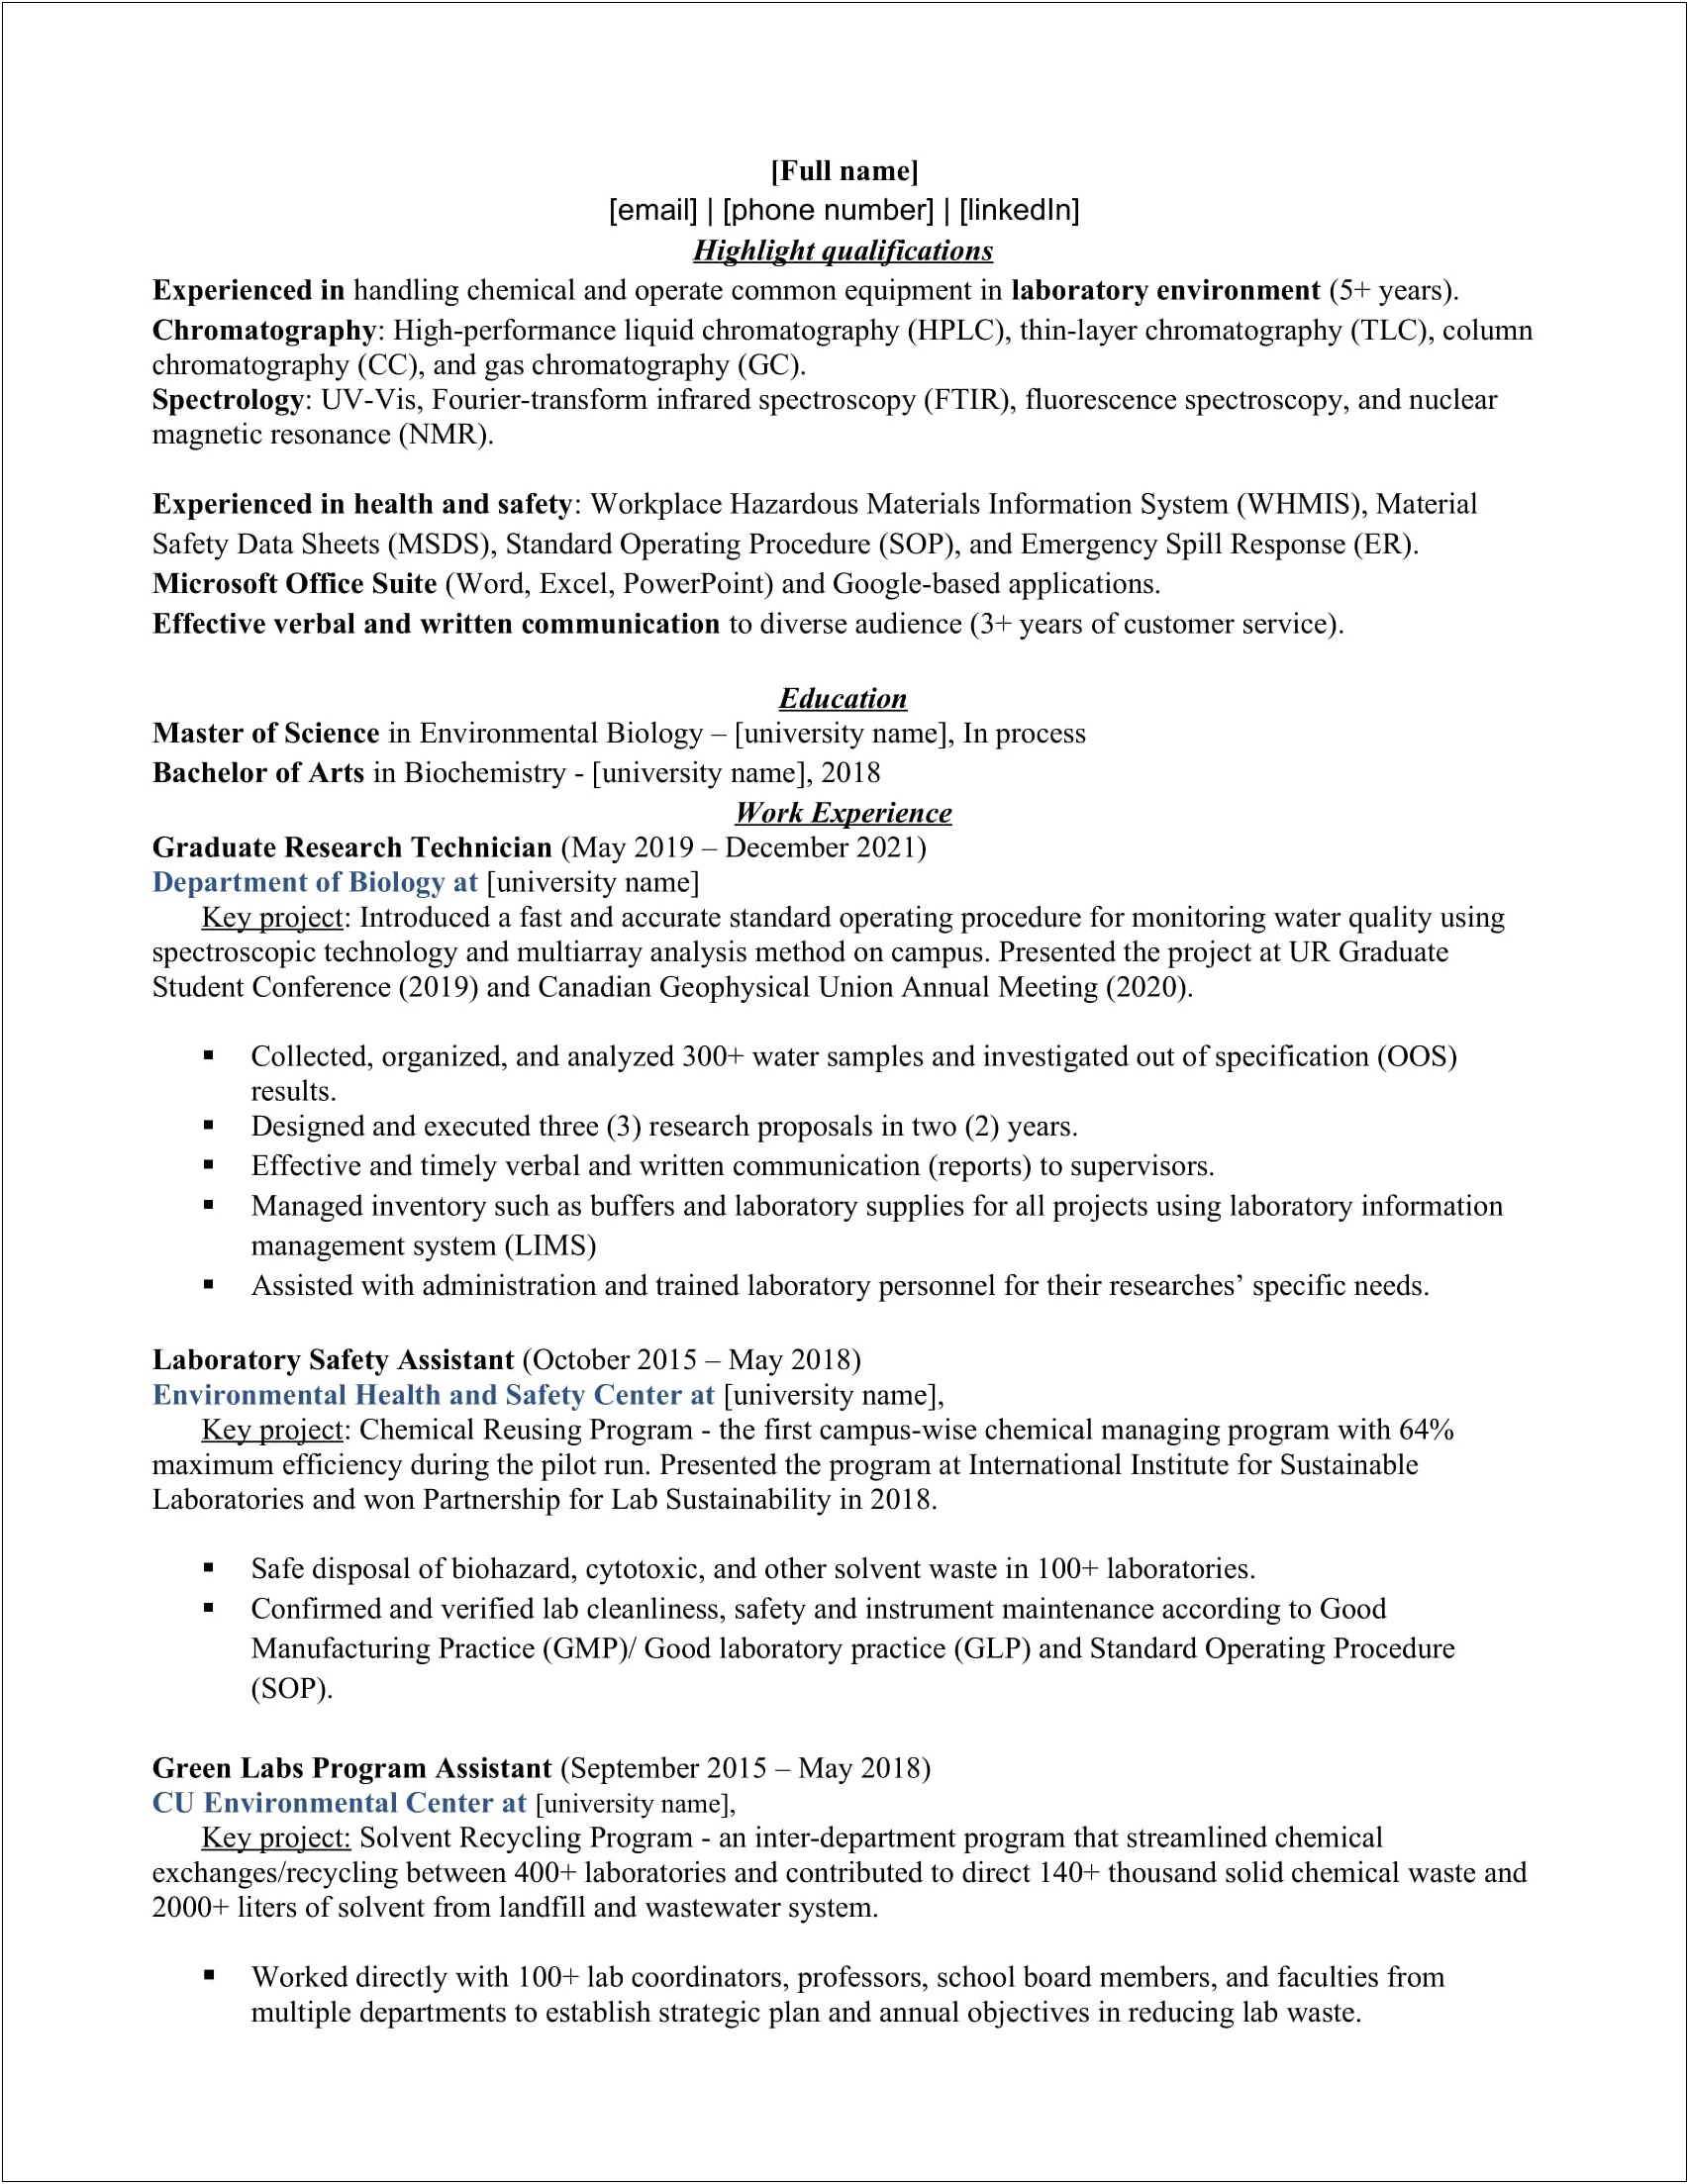 Is Handled A Good Word For Resume